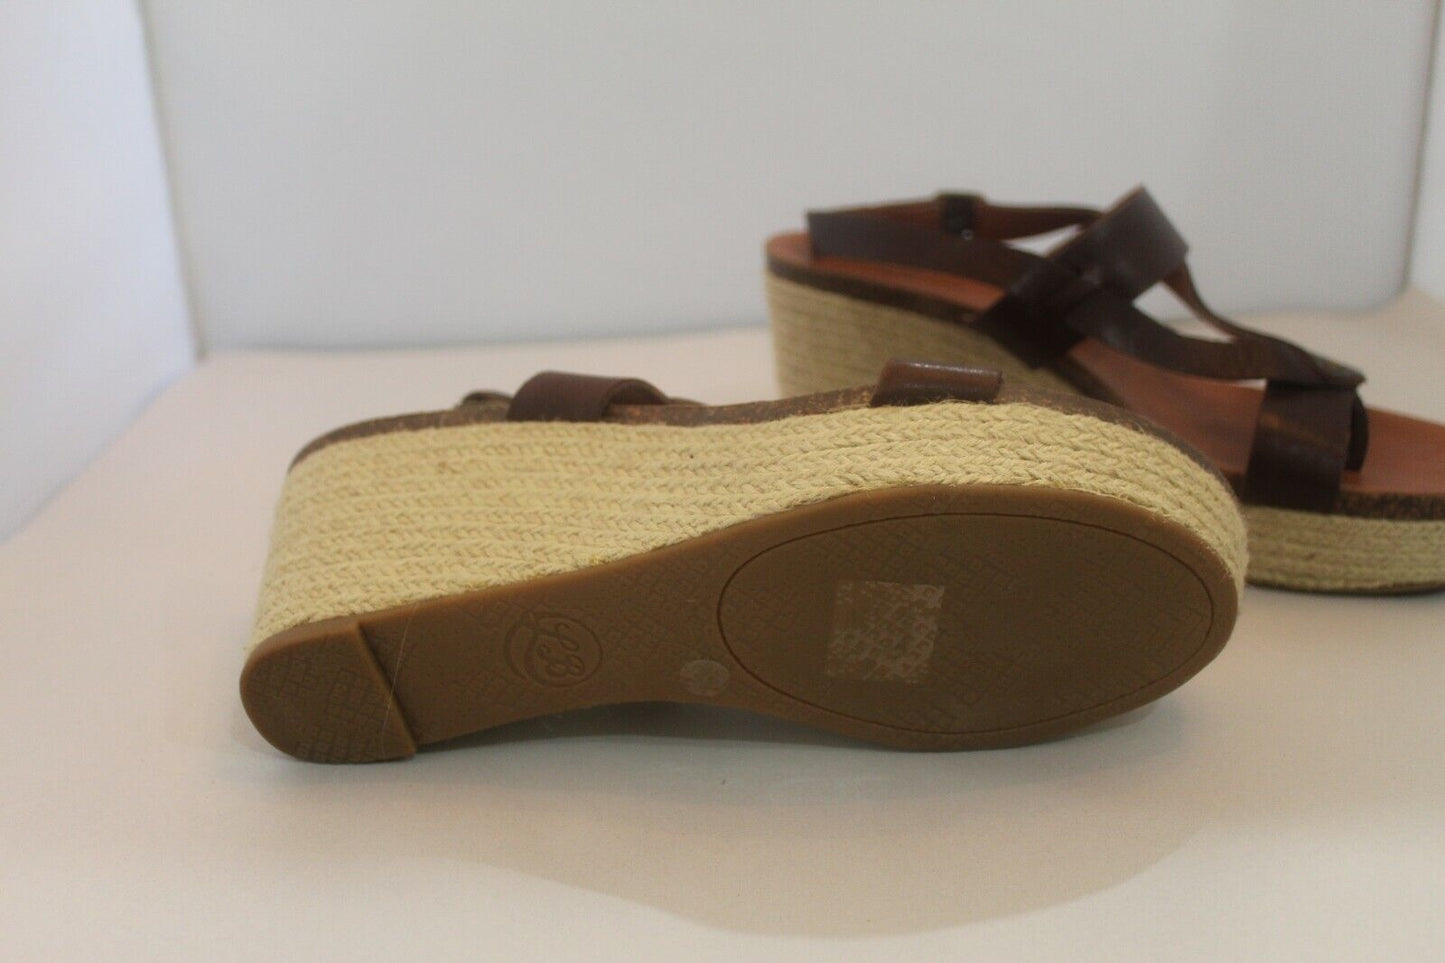 Lucky Brand Wedge Sandals Straw Open Toe Brown Shoes Buckles Boho Shoes Size 9.5